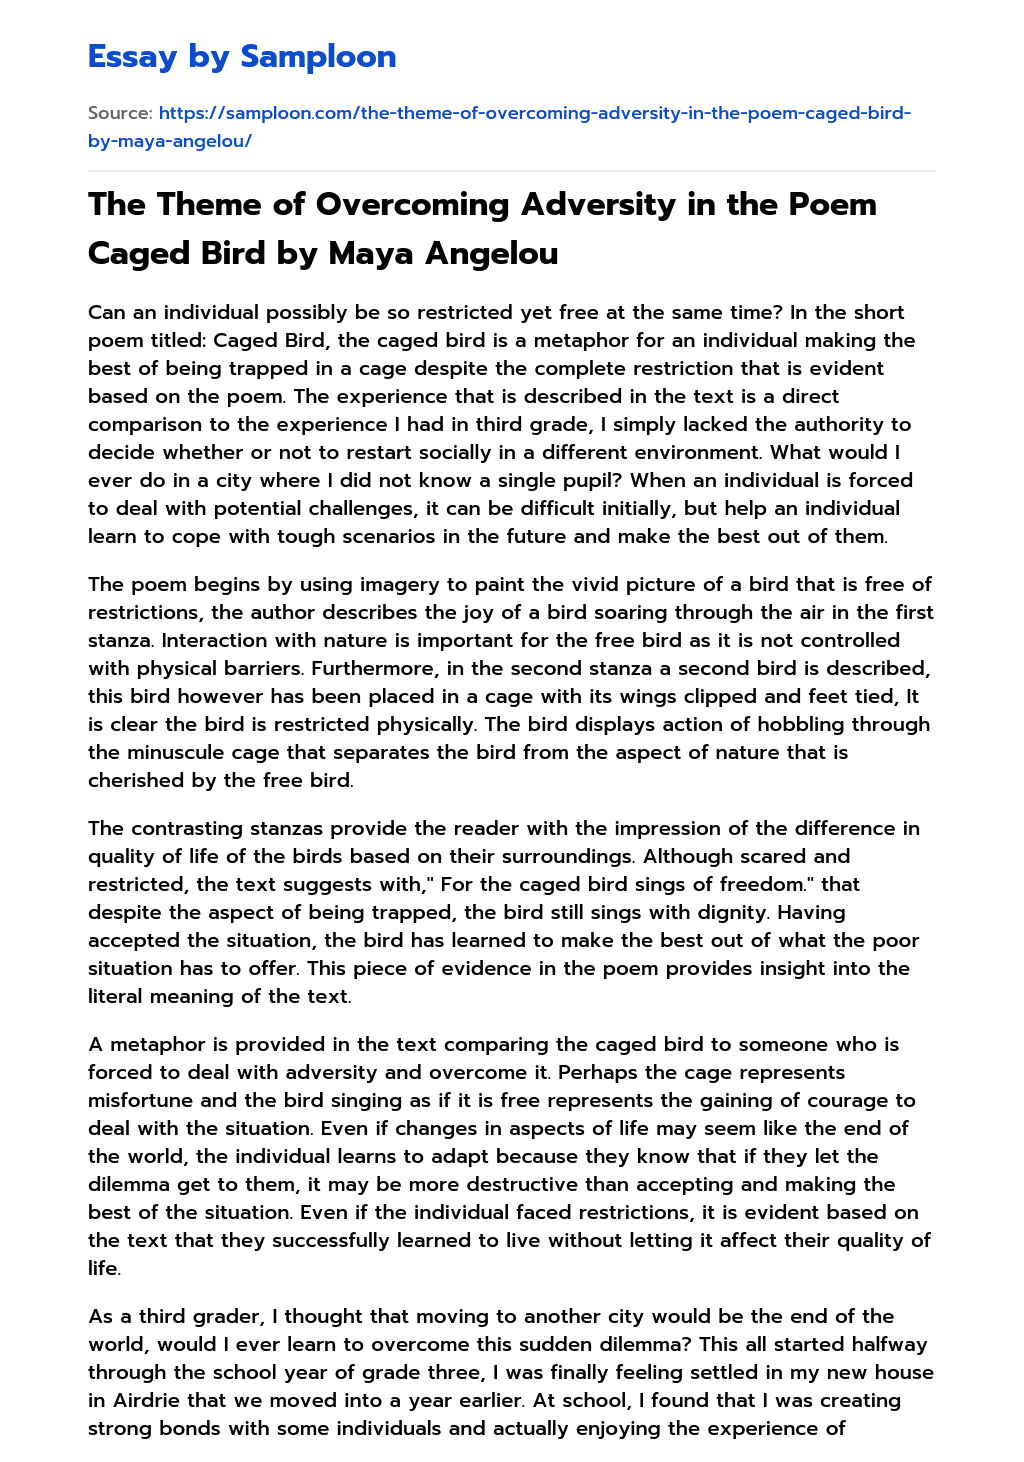 The Theme of Overcoming Adversity in the Poem Caged Bird by Maya Angelou essay